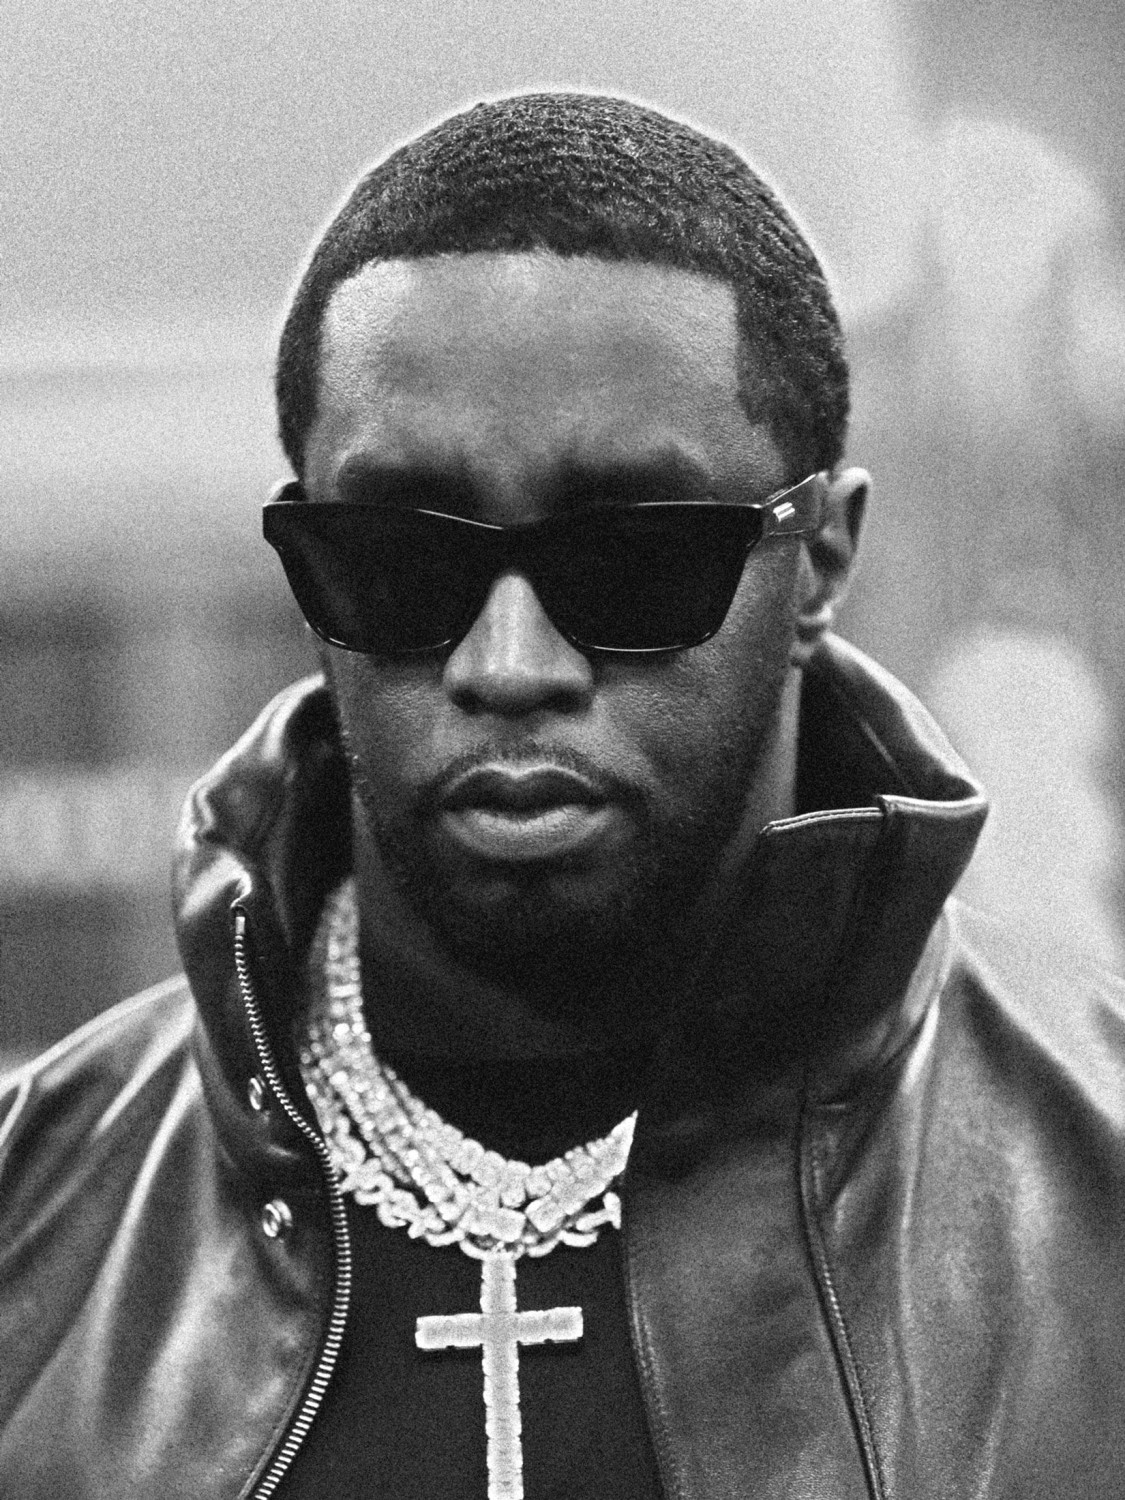 Sean “Diddy” Combs.Photo illustration: 731; Photo: Getty Images